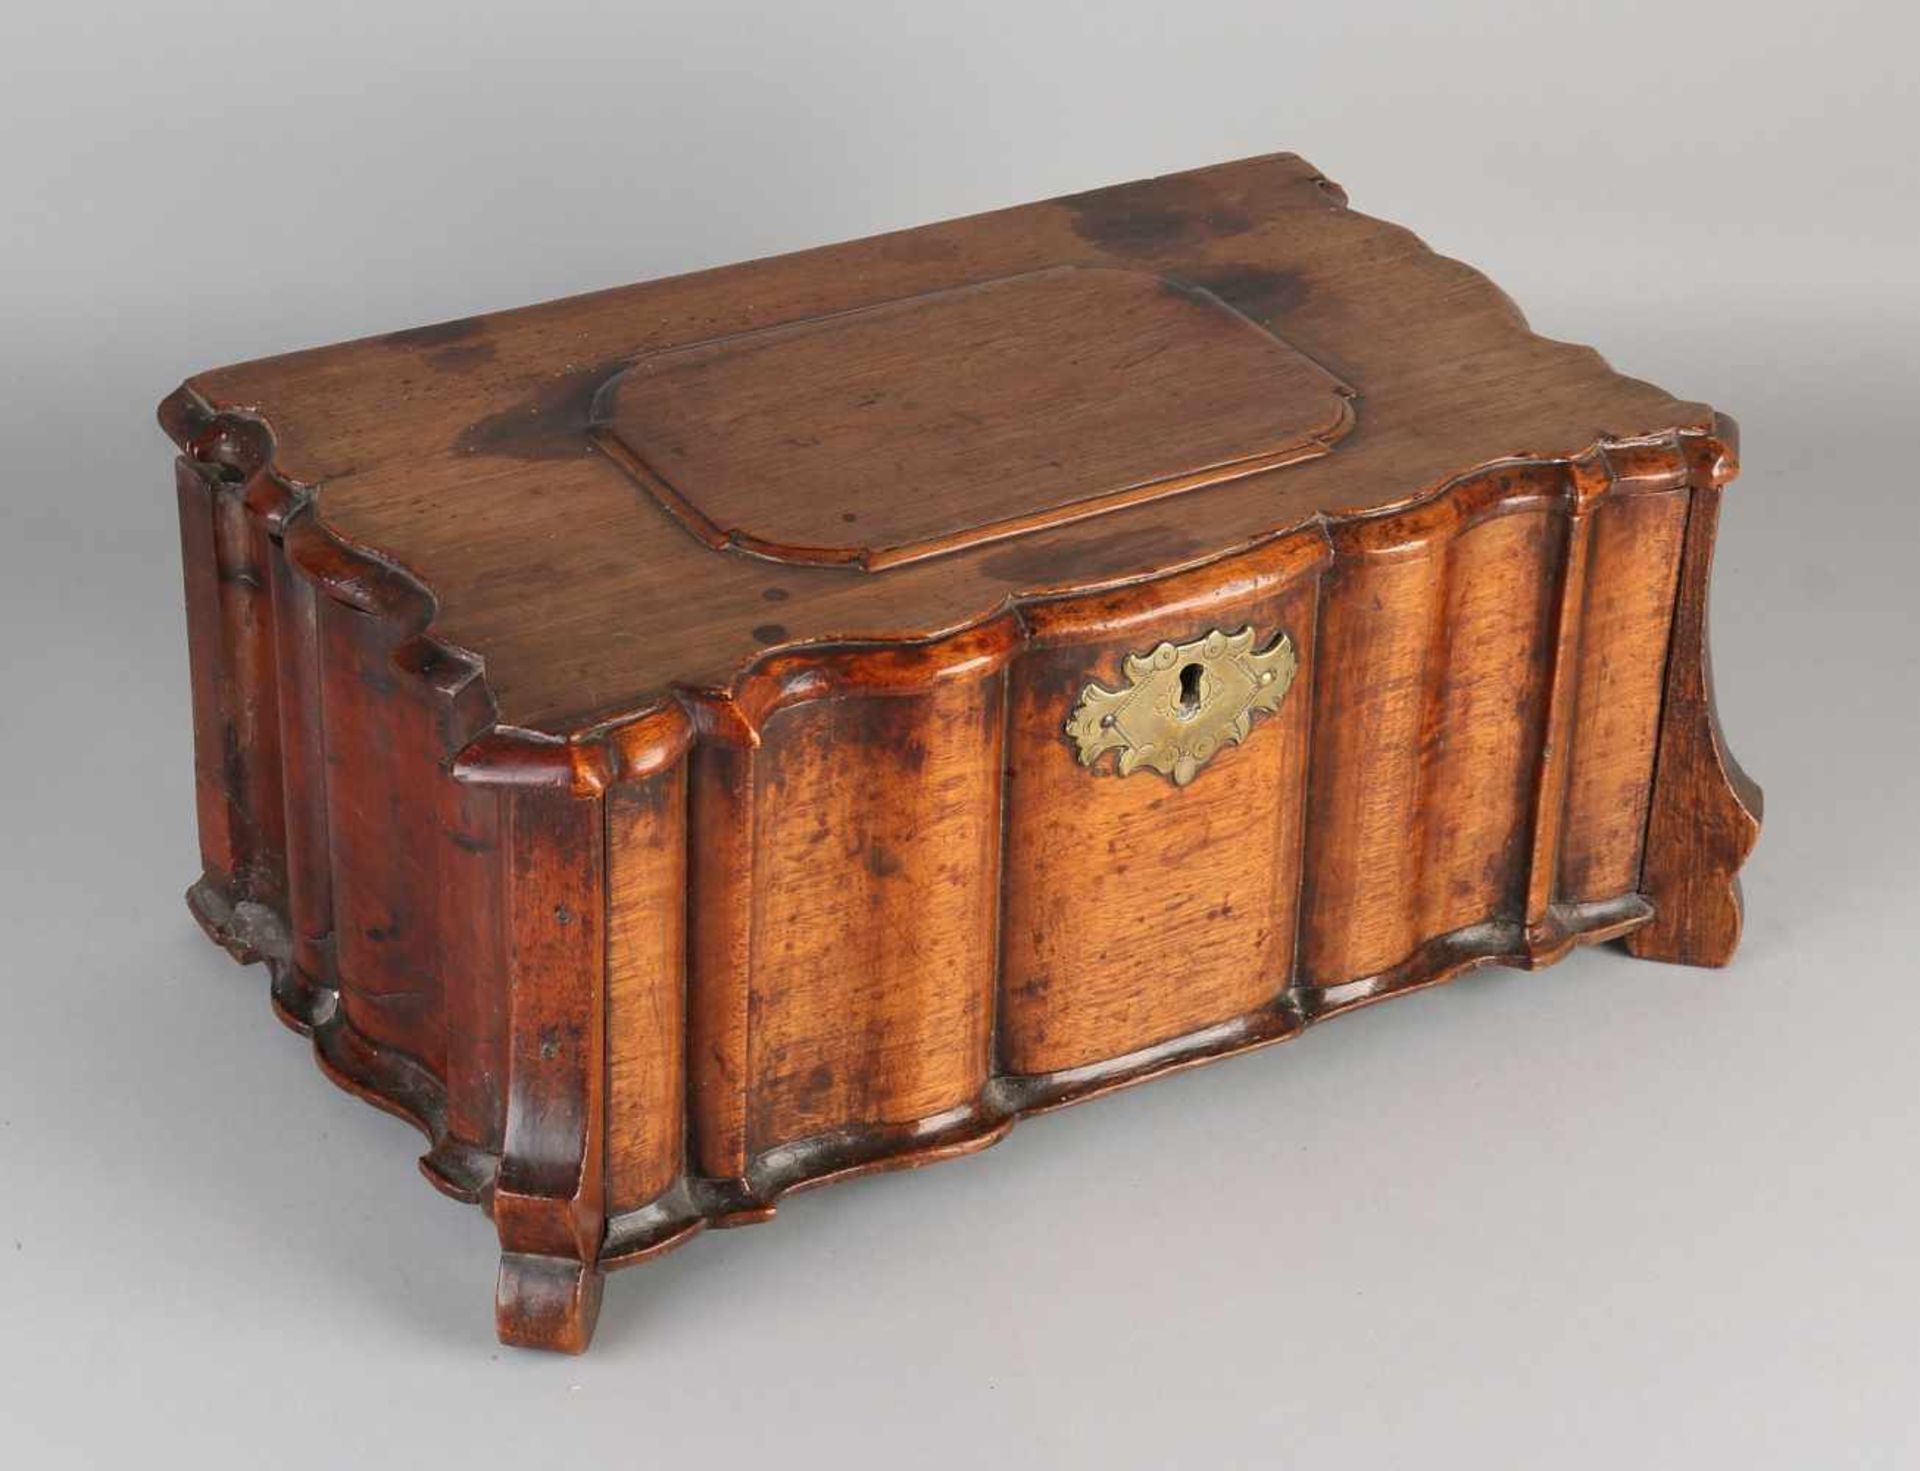 18th Century Louis XV walnut casket documents. Curved organ with original fittings. Beautiful